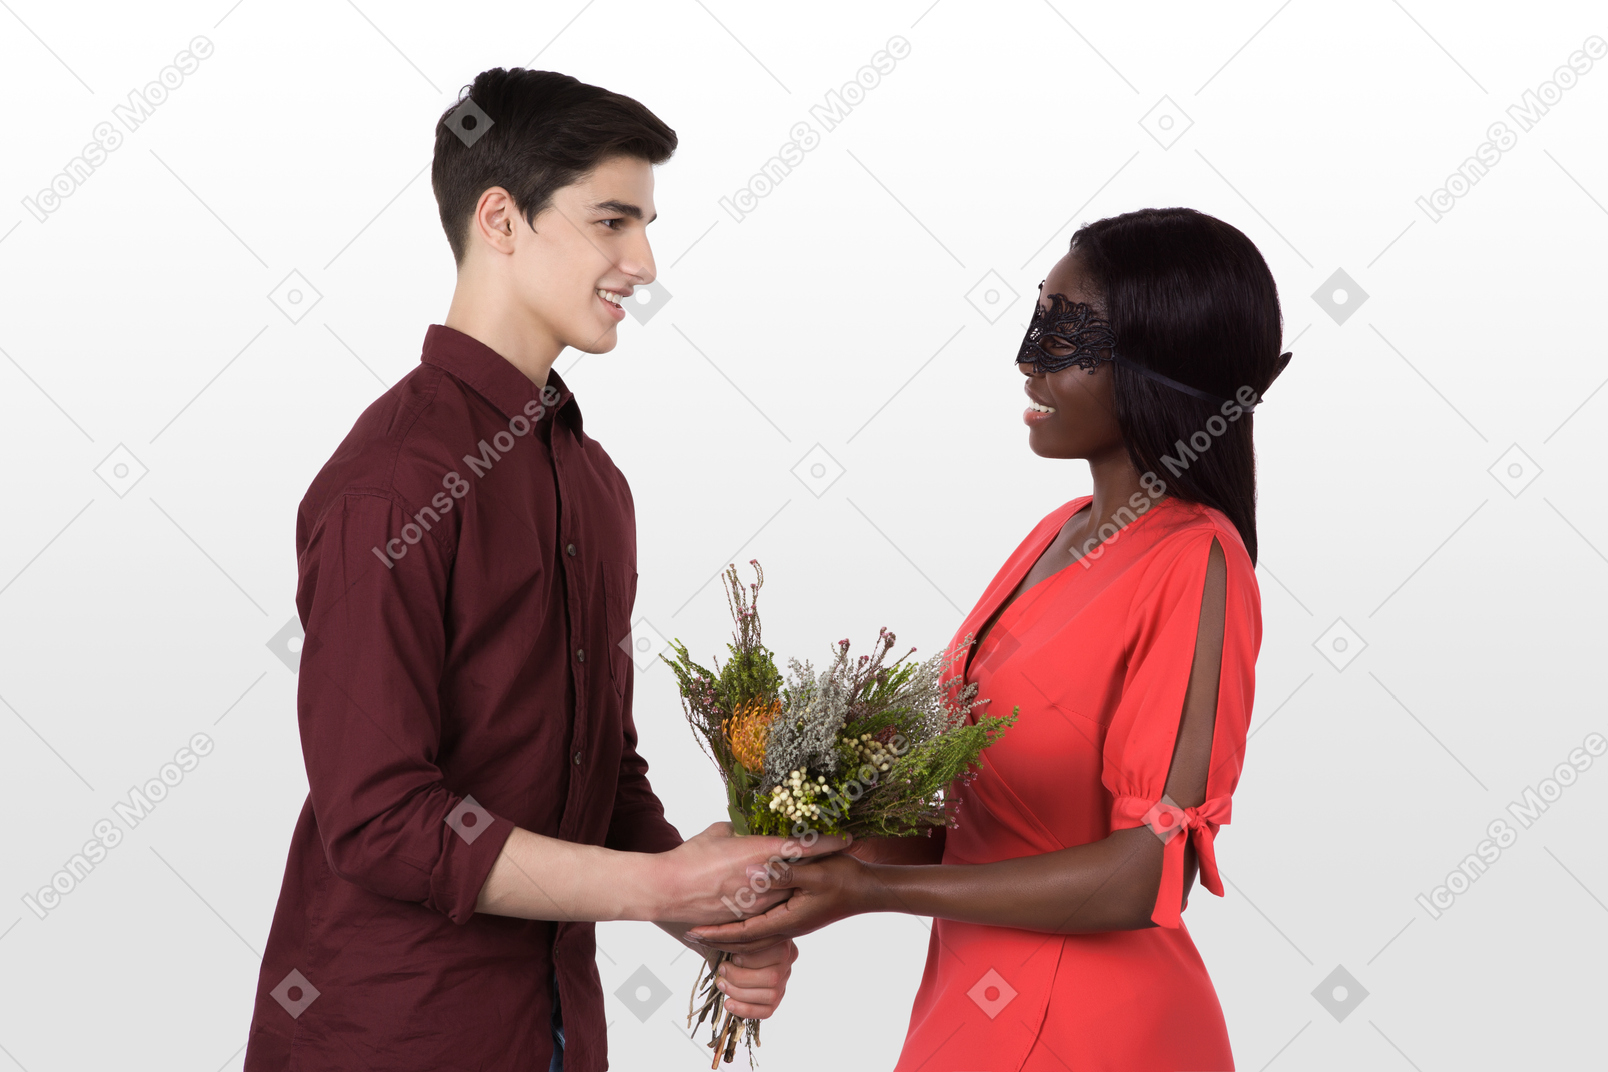 Allow me to give you this bouquet, my love